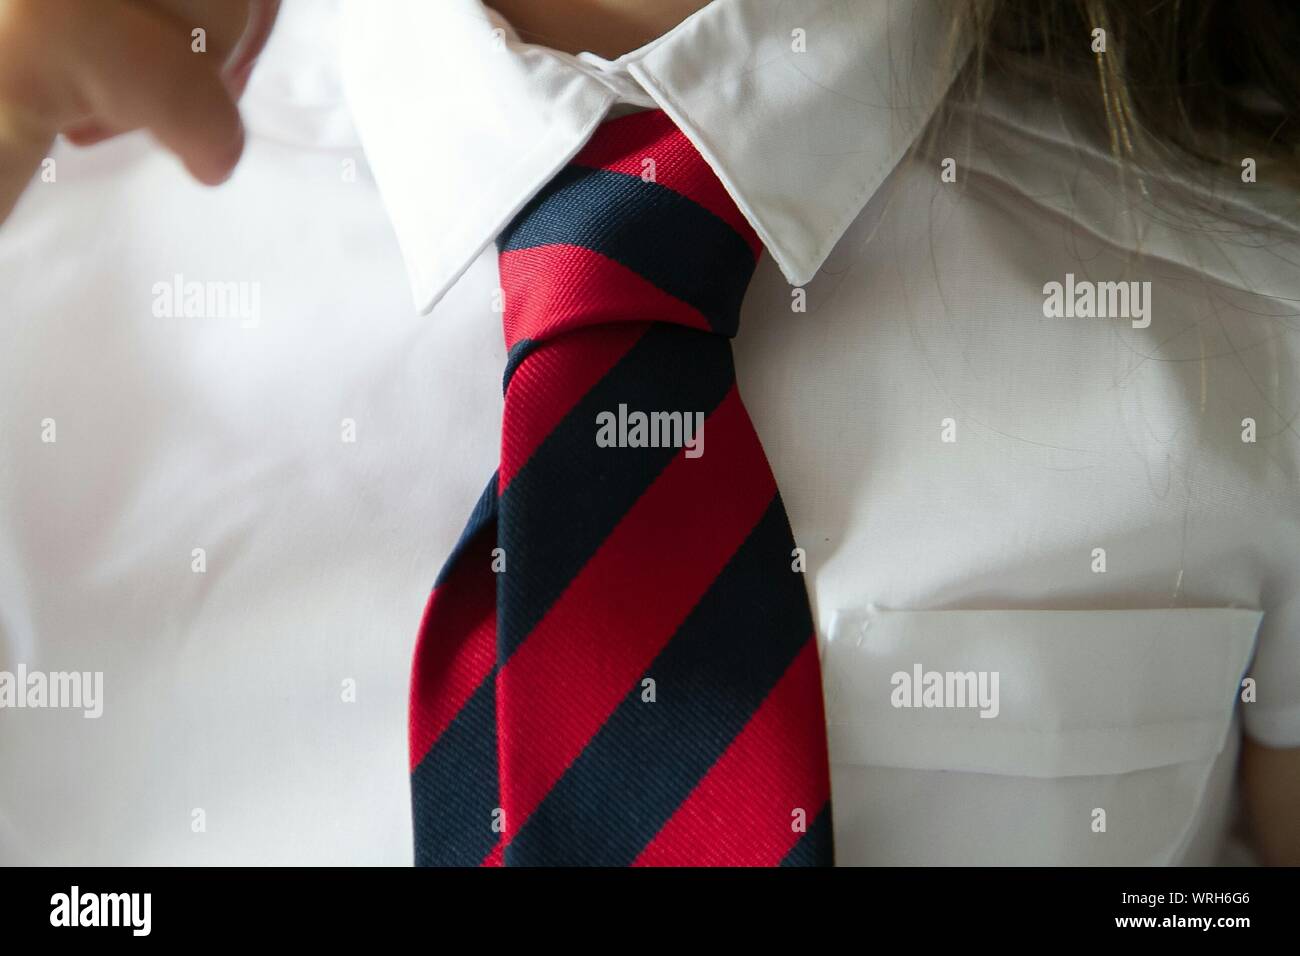 Detail Shot Of Shirt And Tie Stock Photo